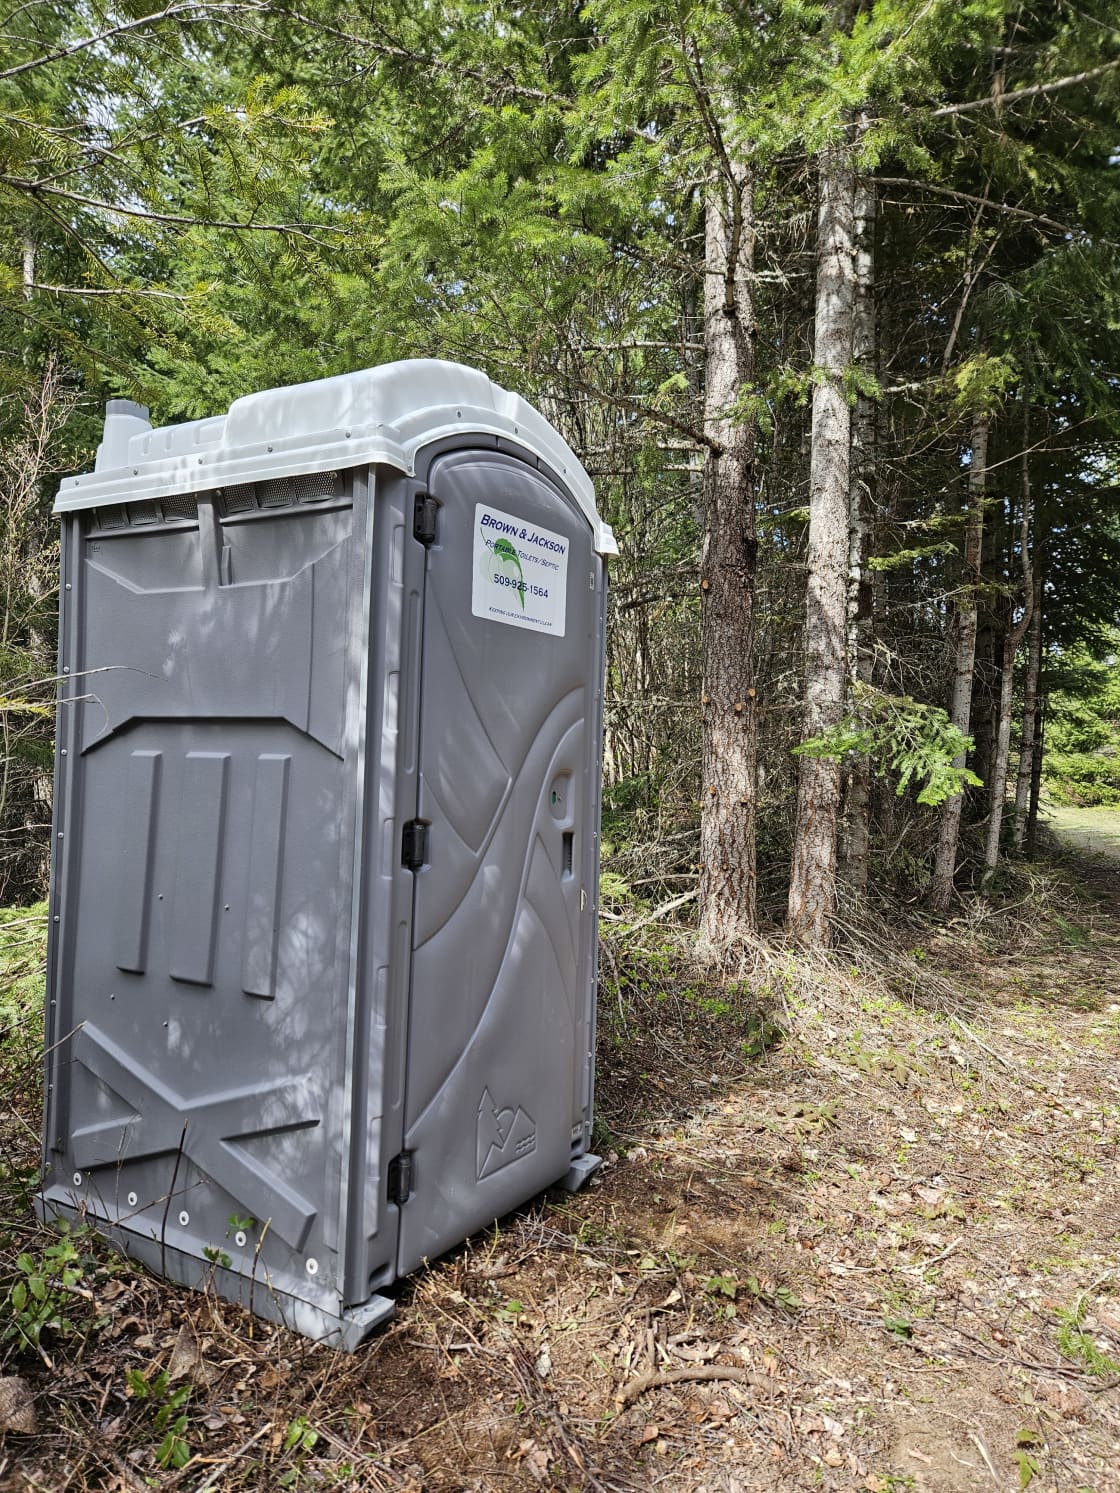 Porta potty located towards the entrance of the camping area. Cleaned weekly